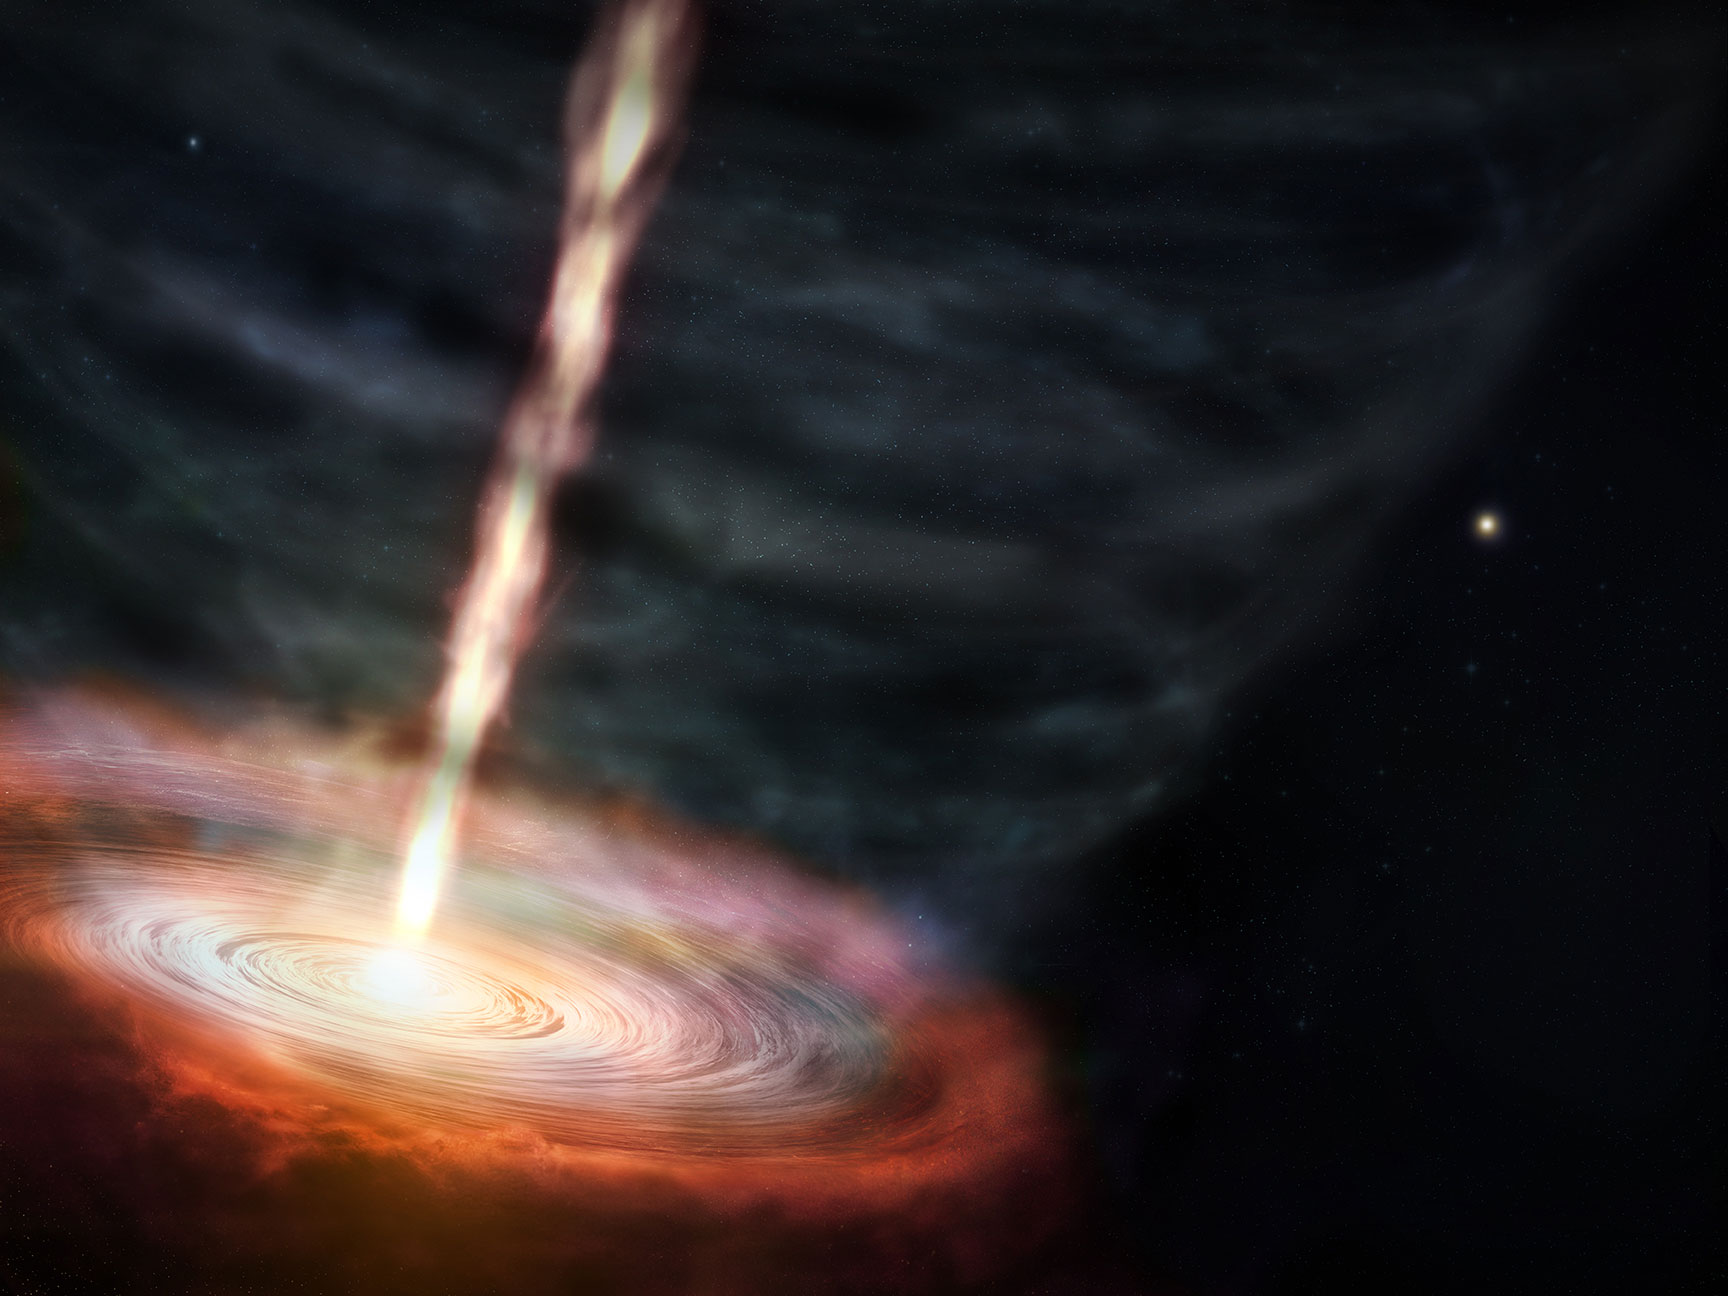 Scientists studying masers — naturally occurring lasers that amplify microwave radio emissions — around the massive star MWC 349A discovered a 500 km/s jet of material launching out of the star’s gas disk from within the winds that are flowing away from the star. The bigger surprise is that the jet may be caused by magnetic forces. This artist's conception shows a zoomed in view of MWC 349A and its surrounding disk of gas and dust that are being shaped by the winds and high-speed jet.